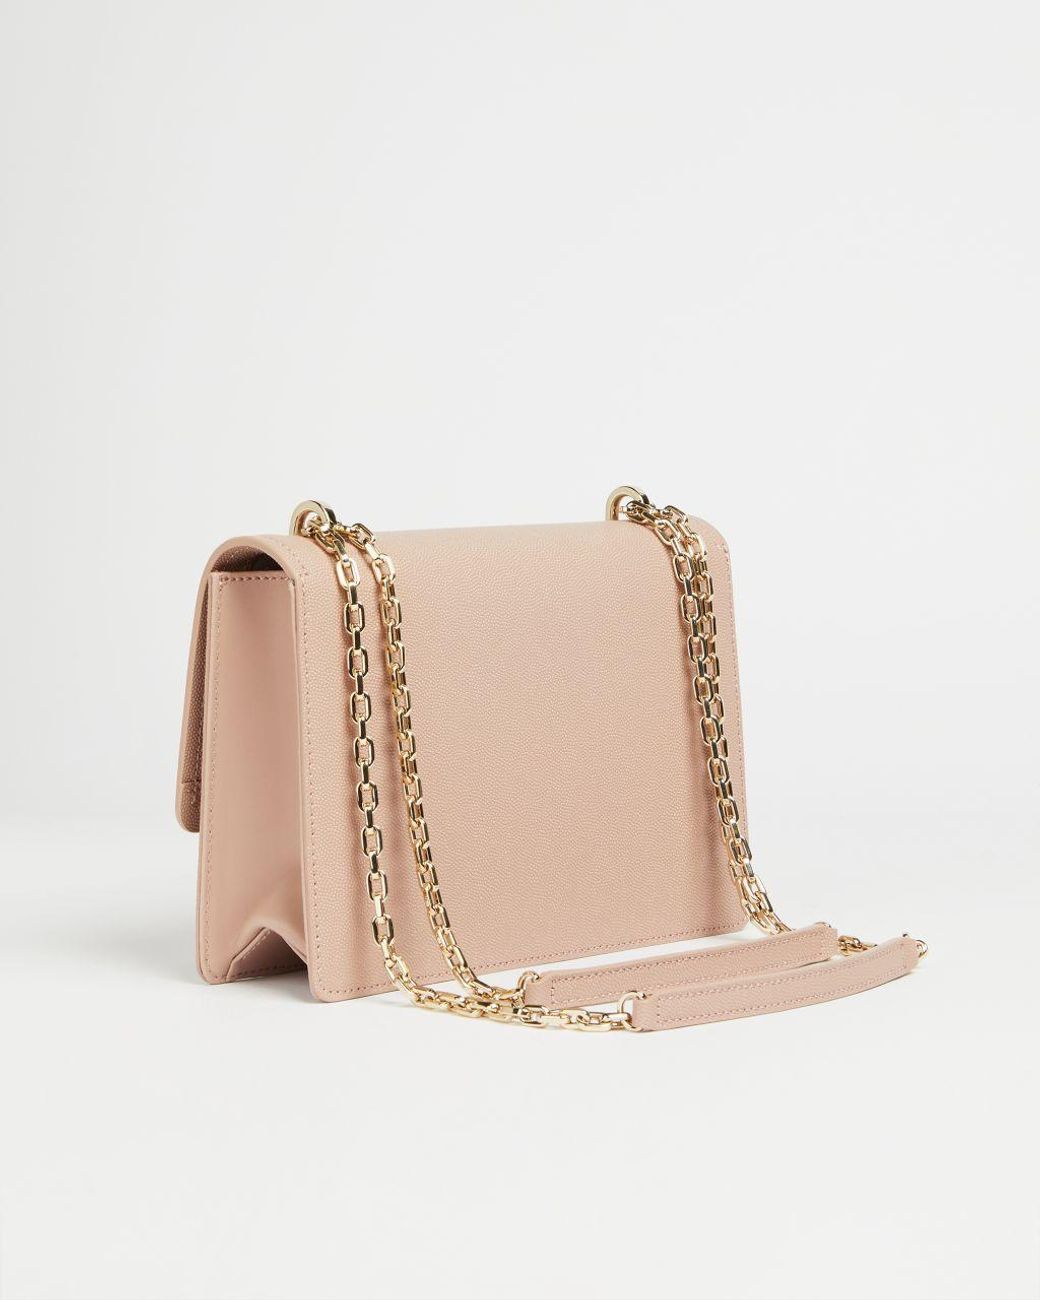 Ted Baker Bow Accent Pink Leather Crossbody Bag With Removable Rose Gold  Chain